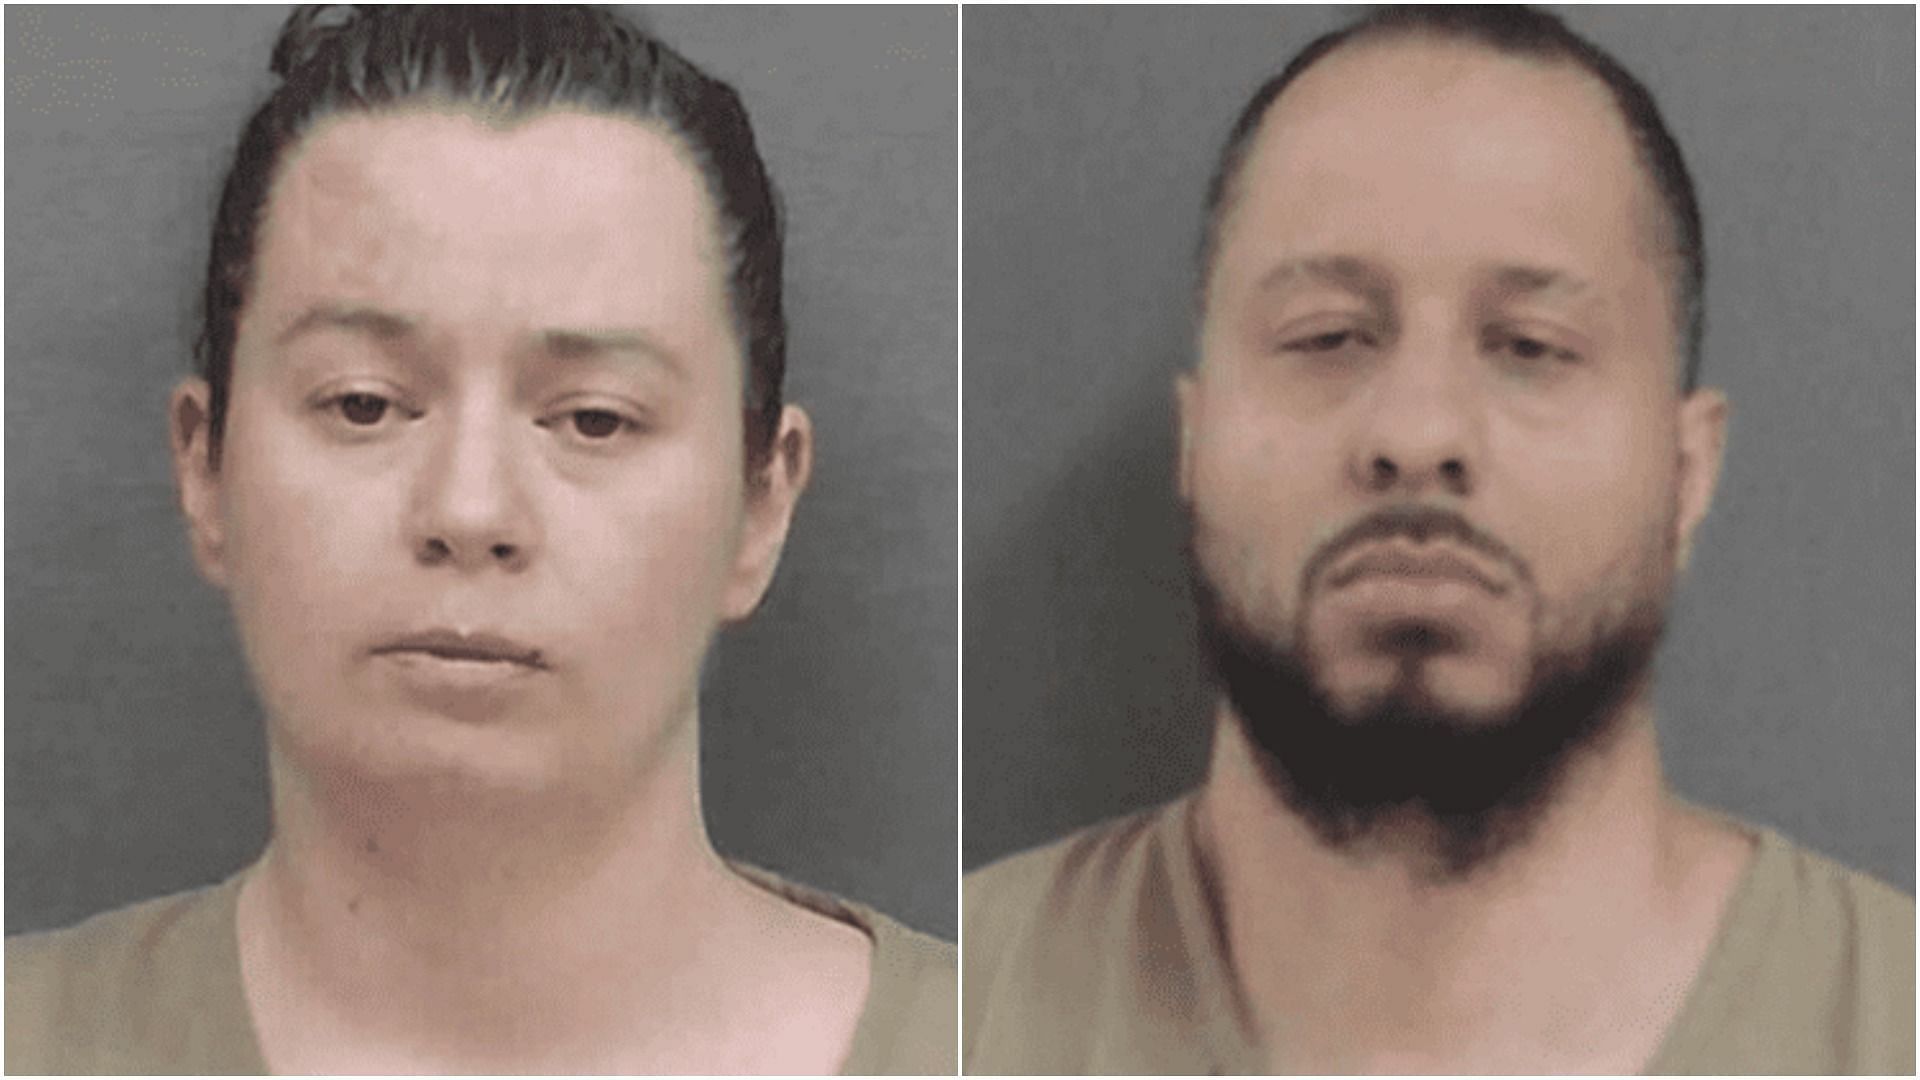 Stephanie Davis and her husband Christoper Davis pled guilty to child abuse charges (Image via Calhoun PD)